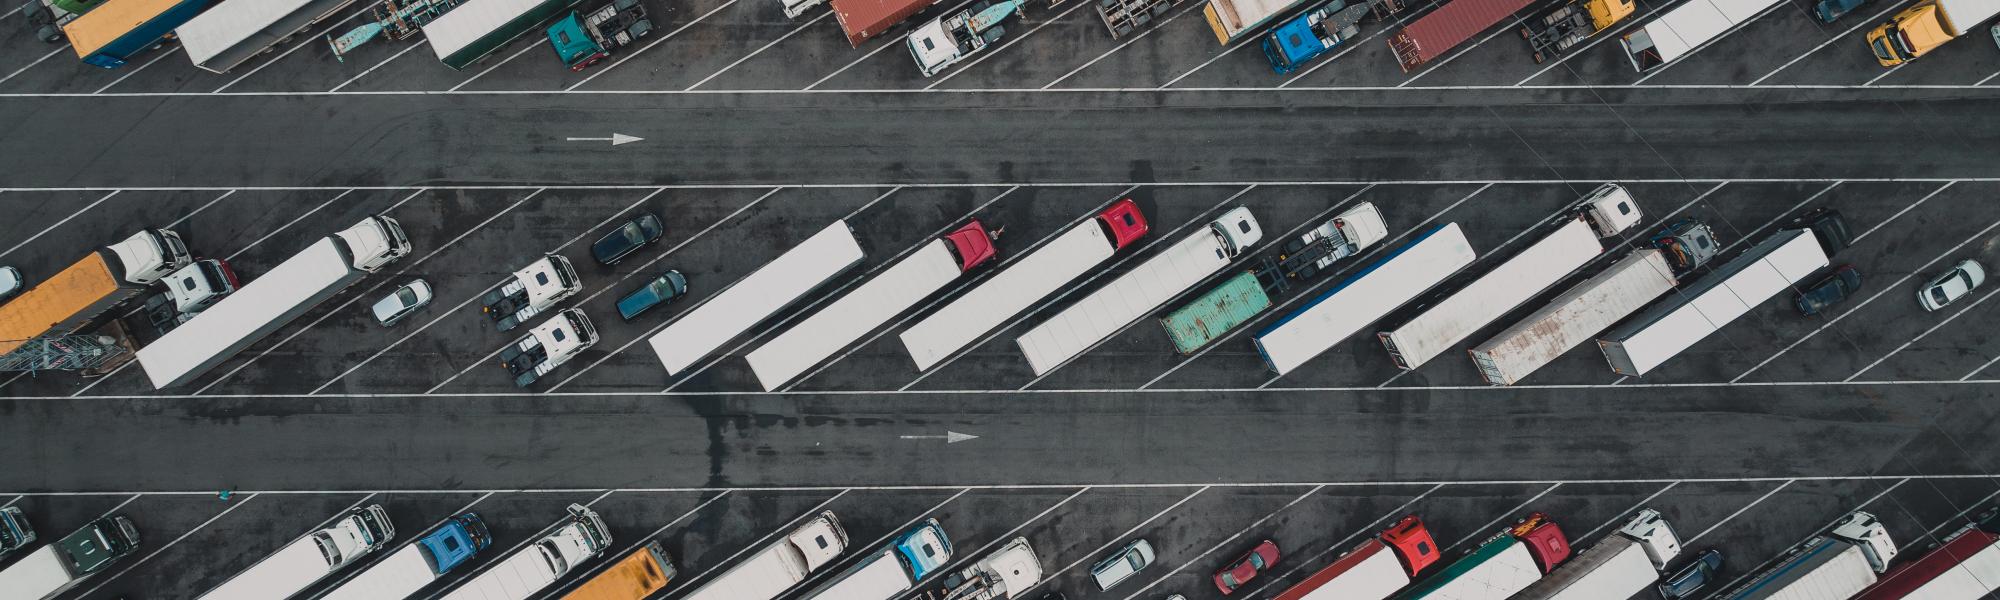 EU launches more flexible third call for truck parking funding 